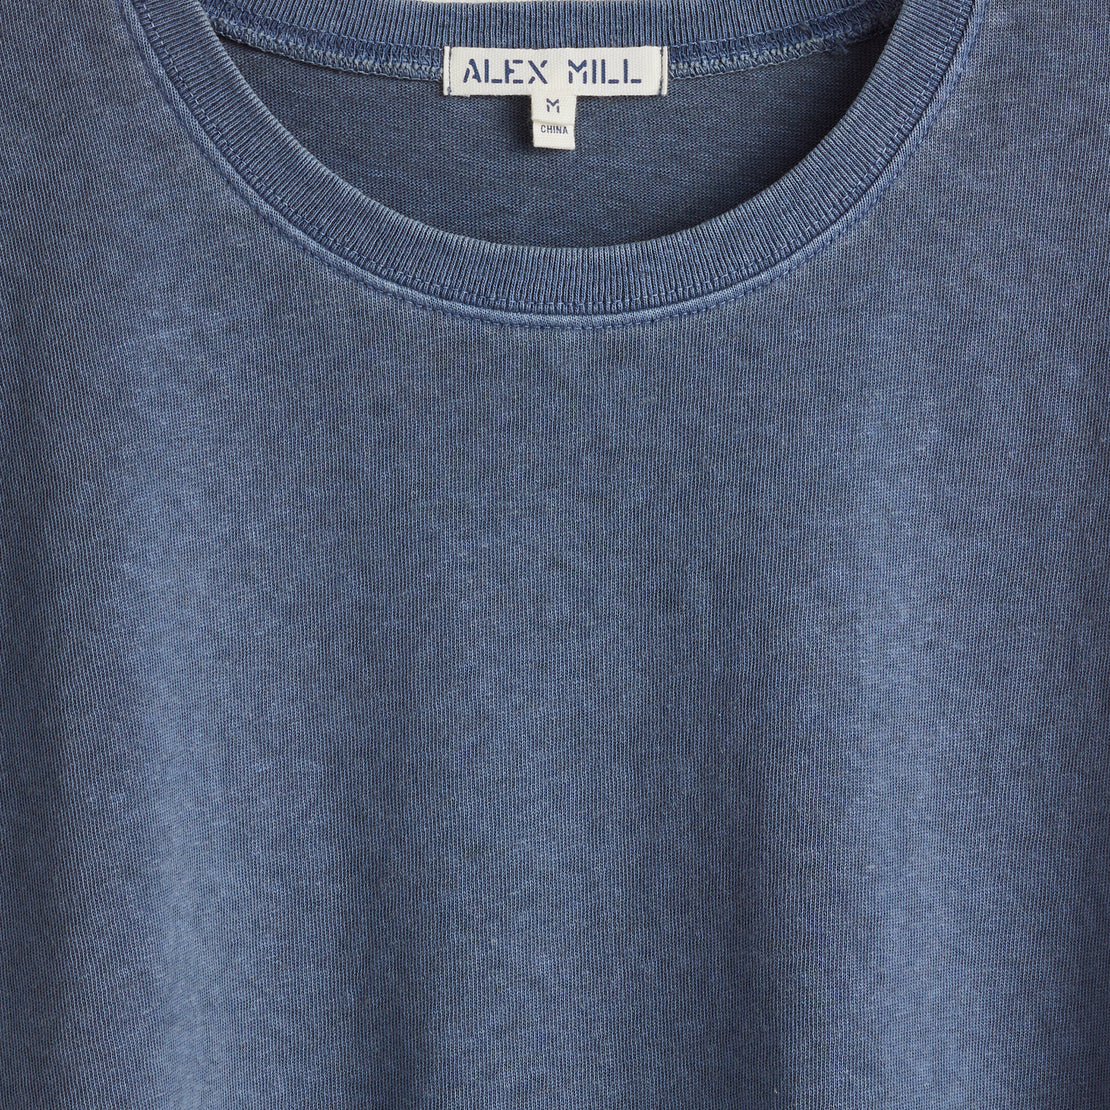 Vintage Wash Crew Neck Tee - Faded Blue - Alex Mill - STAG Provisions - W - Tops - S/S Tee